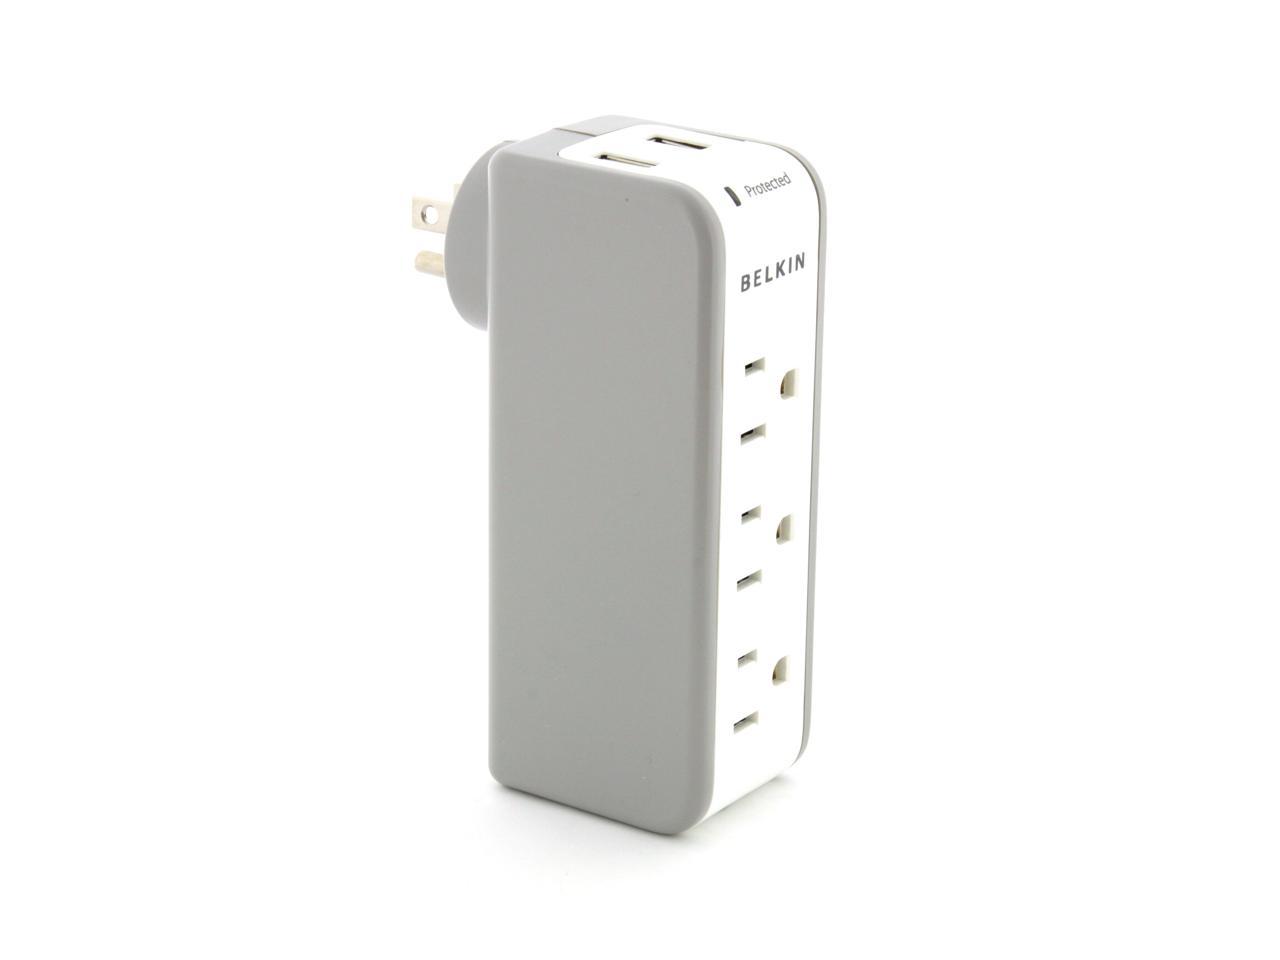 BELKIN BZ103050-TVL Wall Mount 3 Outlets 918 Joules Mini Surge Protector with 2 USB Charger 